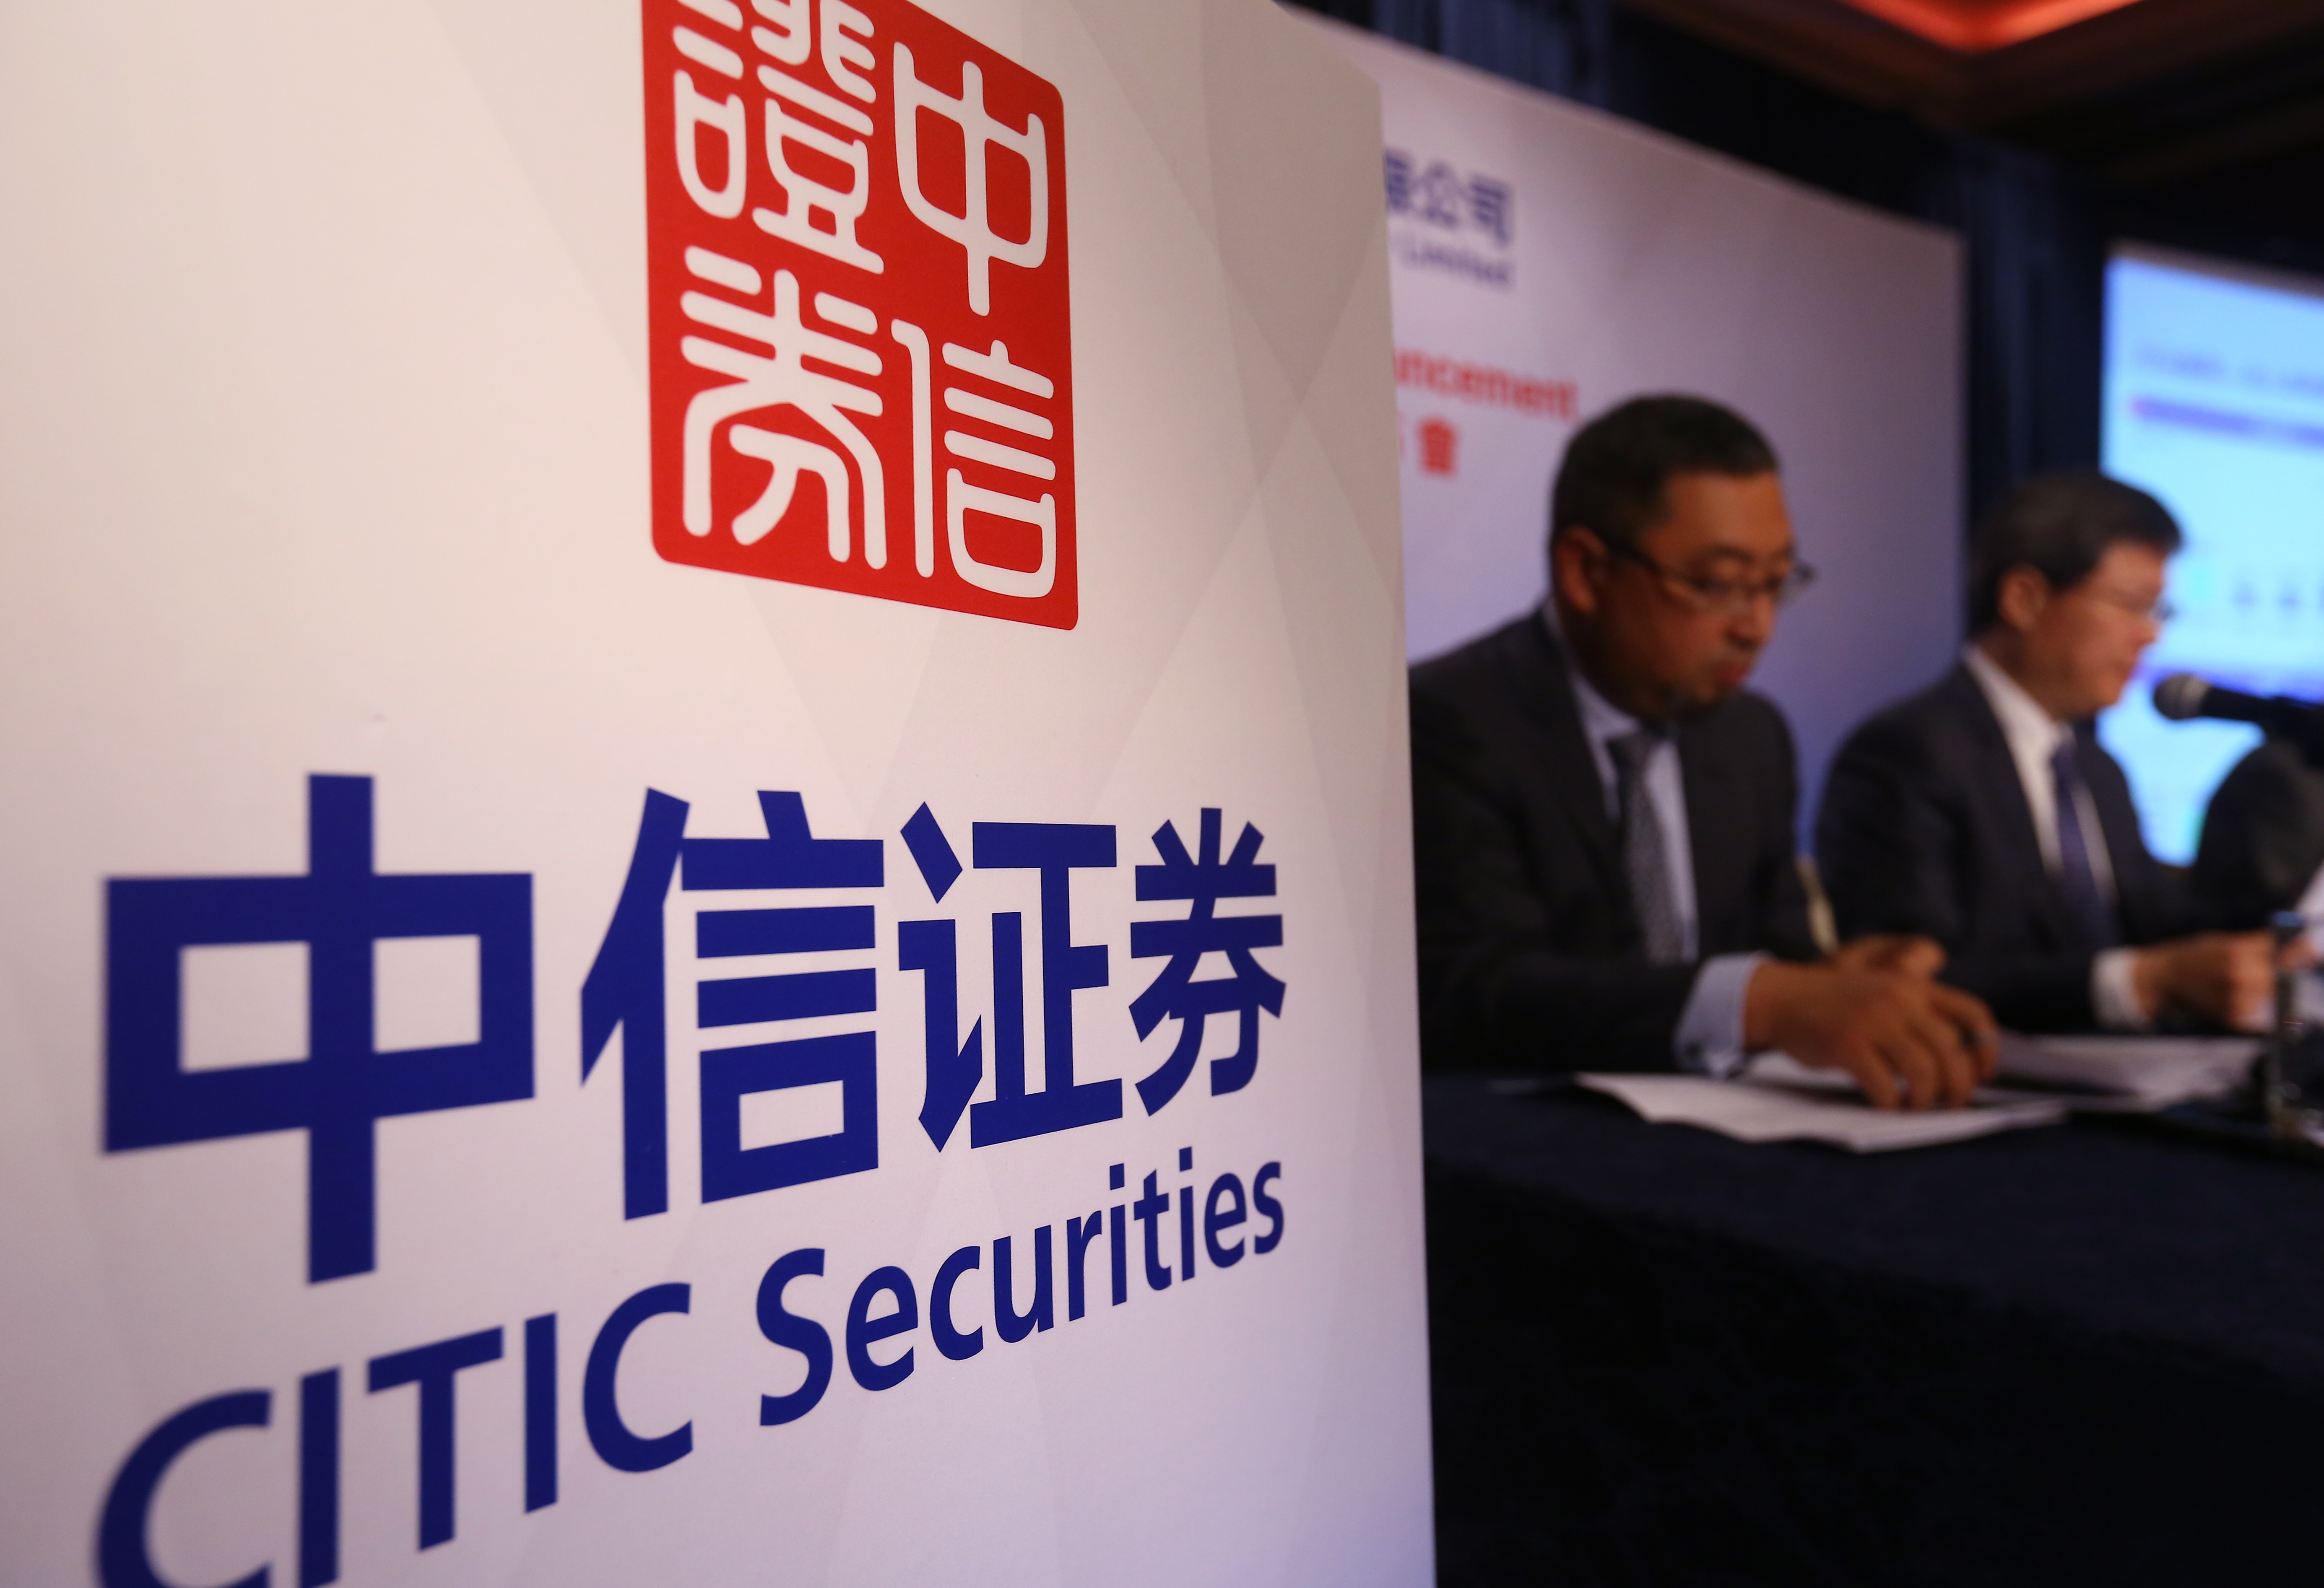 Citic Securities (L to R) Head of Brokerage – International David Shang and Chairman Zhang Youjun during a press conference in Admiralty on 24 March 2016. Photo: SCMP/Edmond So